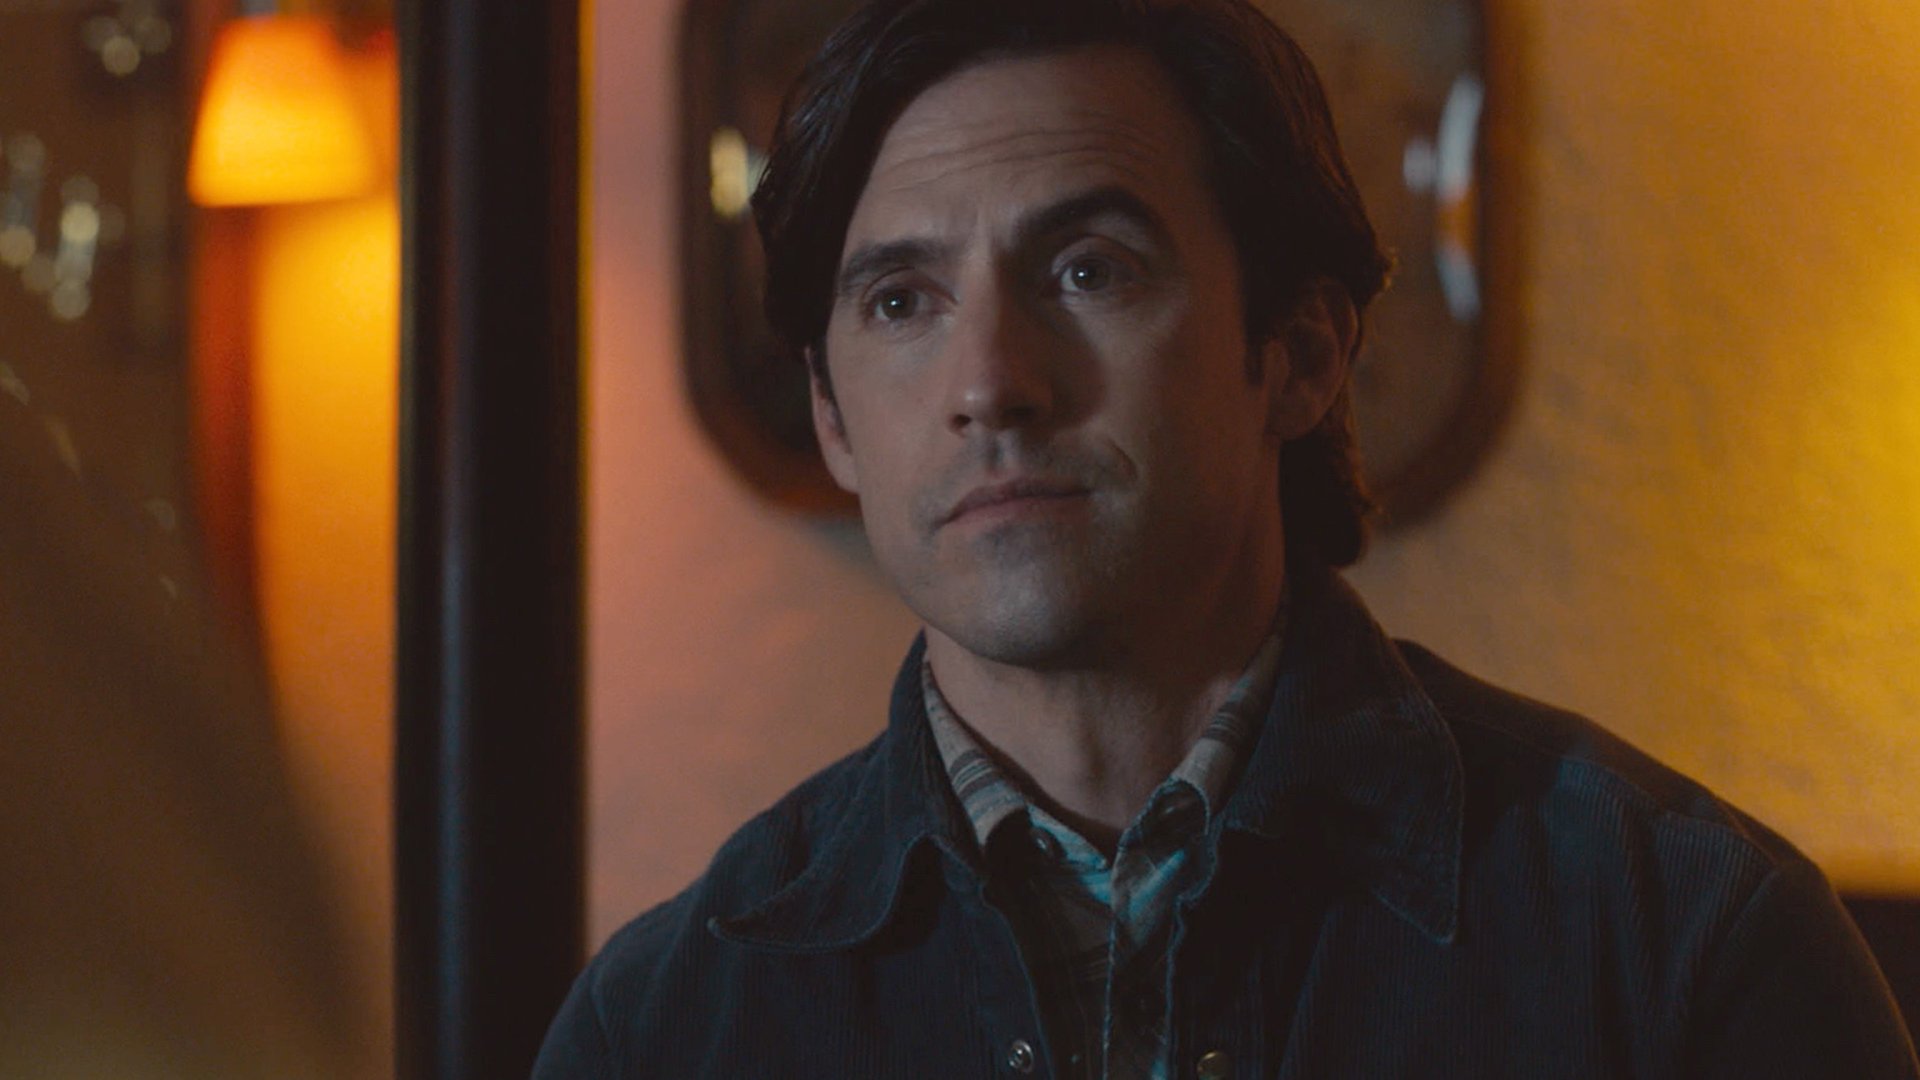 Milo Ventimiglia as young Jack Pearson looking up at someone in ‘This Is Us’ Season 5 Episode 11